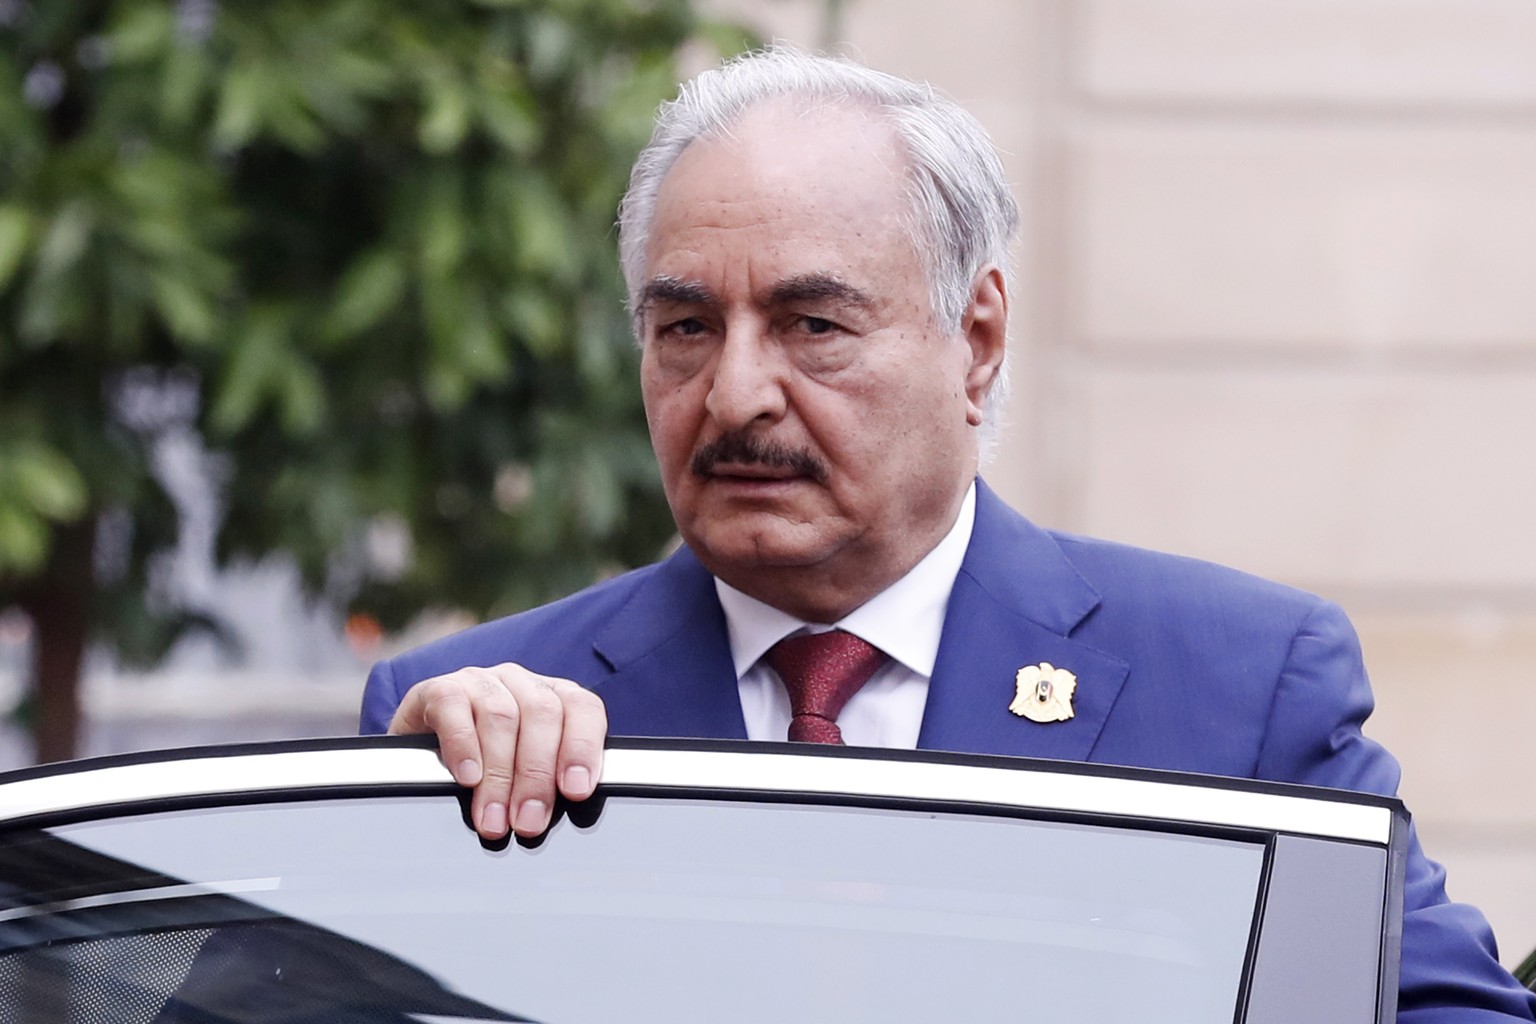 epa07487108 (FILE) - Libya Chief of Staff, Marshall Khalifa Haftar arrives for the international congress on Libya, at the Elysee Palace in Paris, France, 29 May 2018 (reissued 05 April 2019). Accordi ...